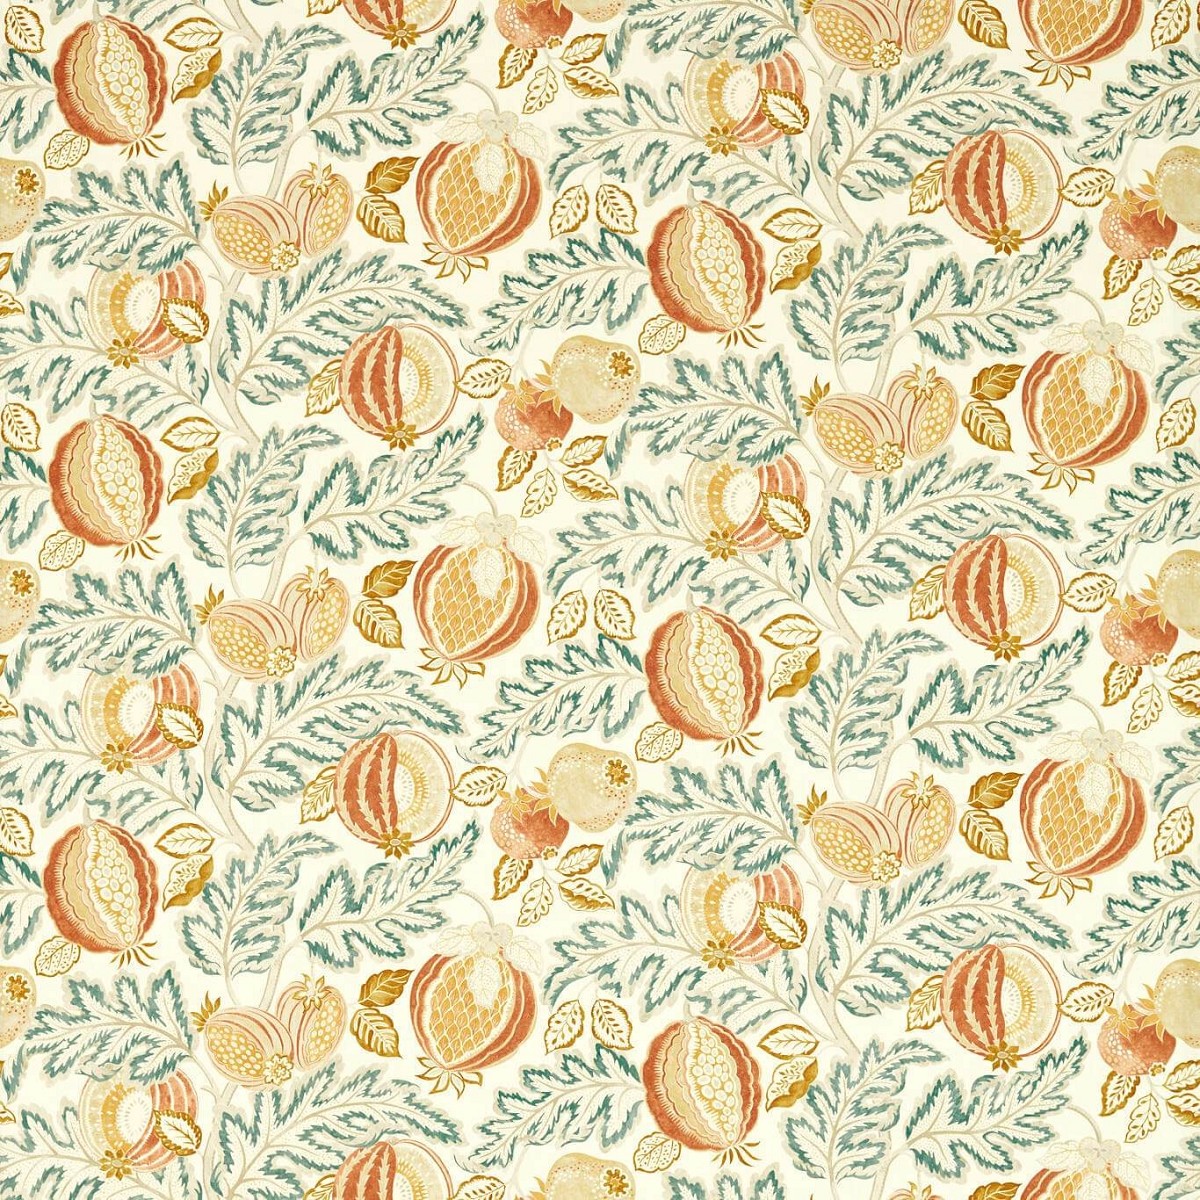 Cantaloupe Sandstone/Agave Fabric by Sanderson